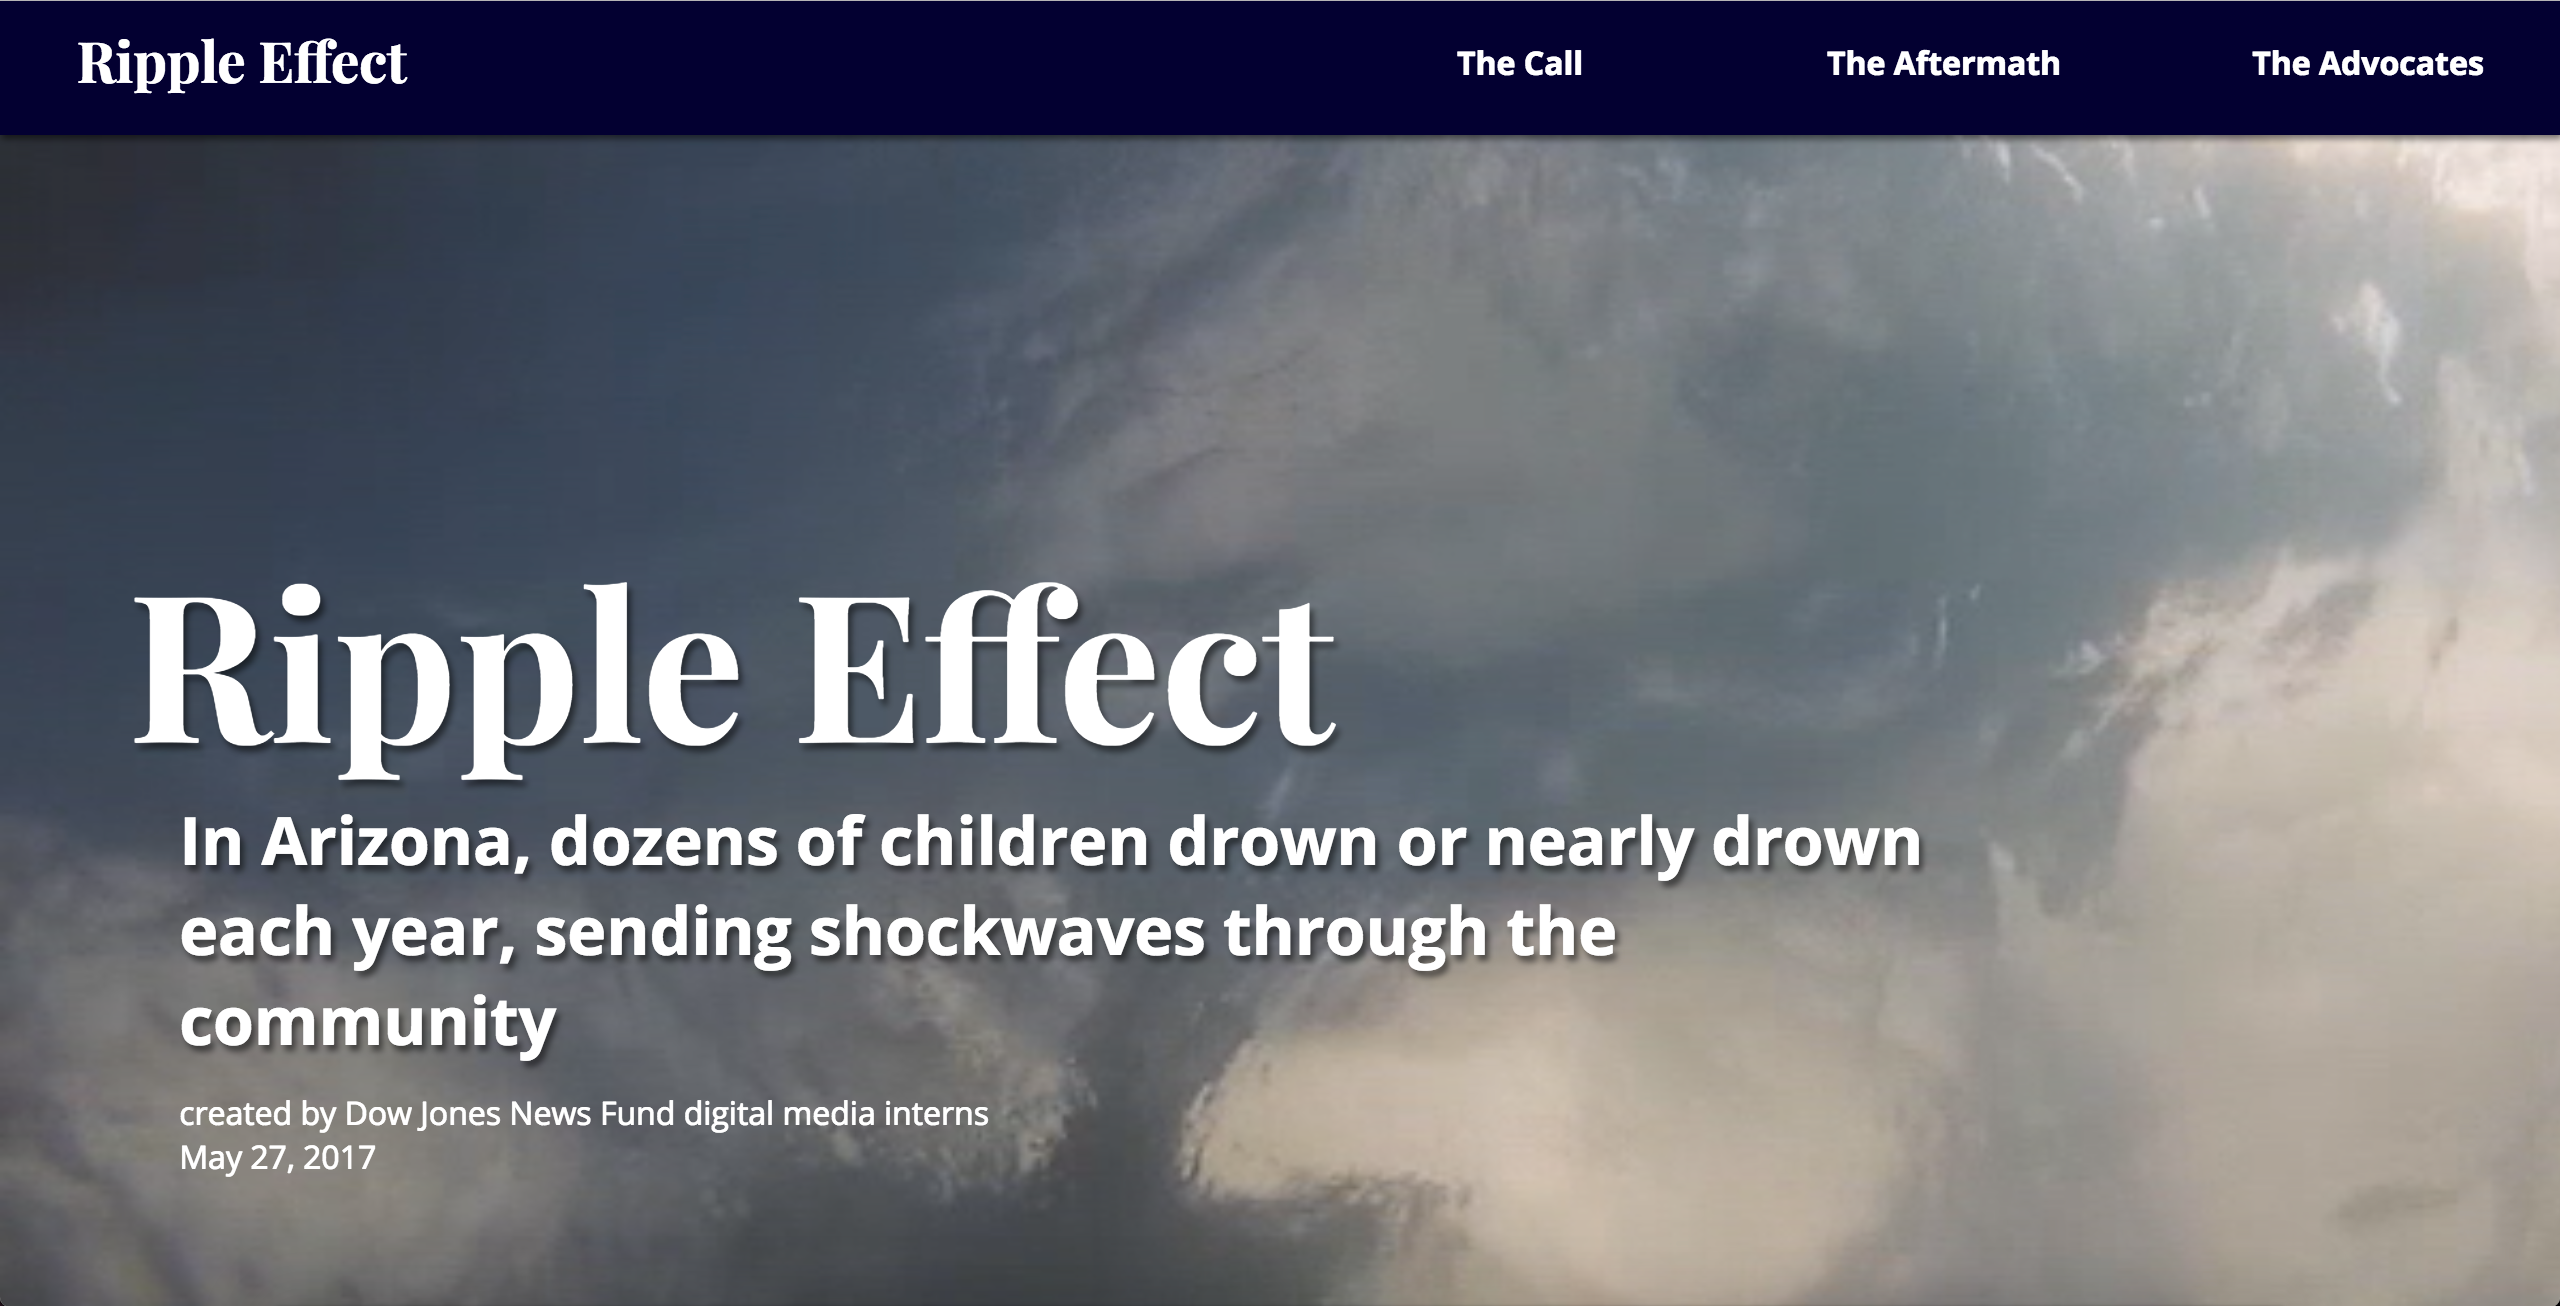 A screenshot of the top of the Ripple Effect site. The title text is overlaid on a rippling water background.